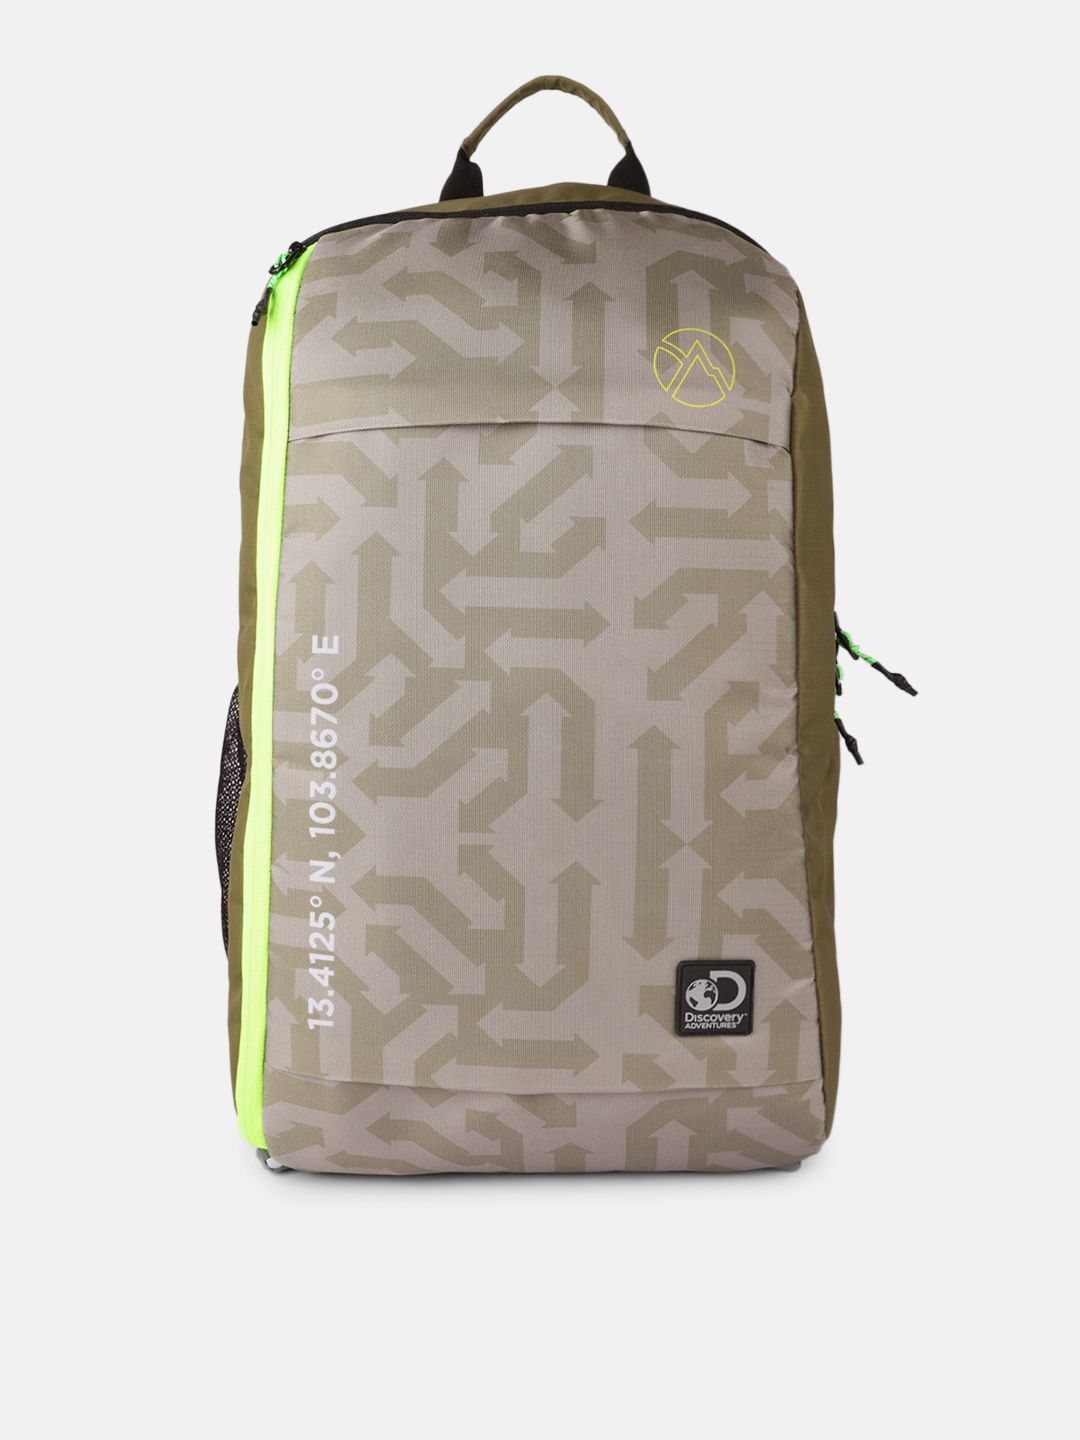 Roadster Unisex Olive Green Discovery Climb Printed Laptop Backpack Price in India